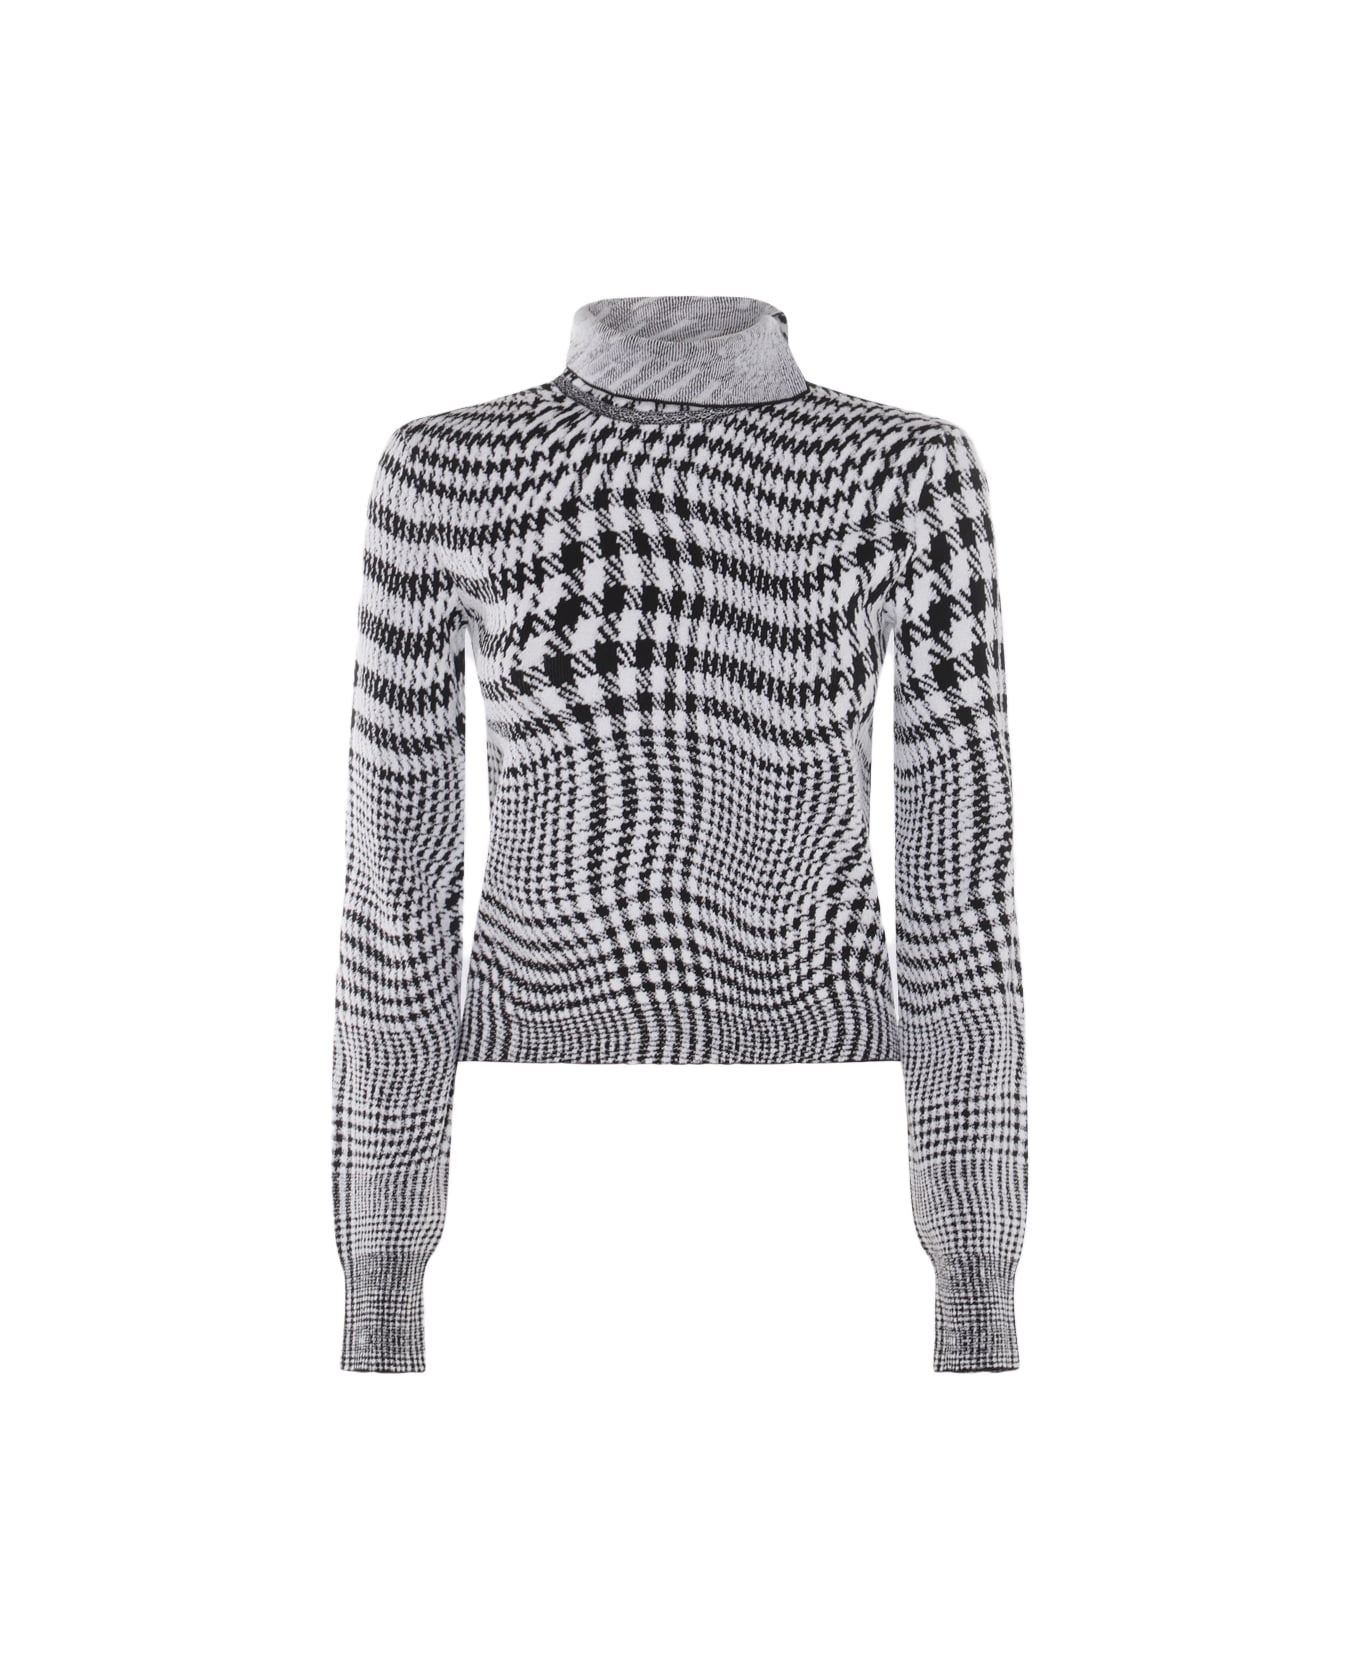 Burberry White And Black Wool Blend Jumper - MONOCHROME IP PTTN